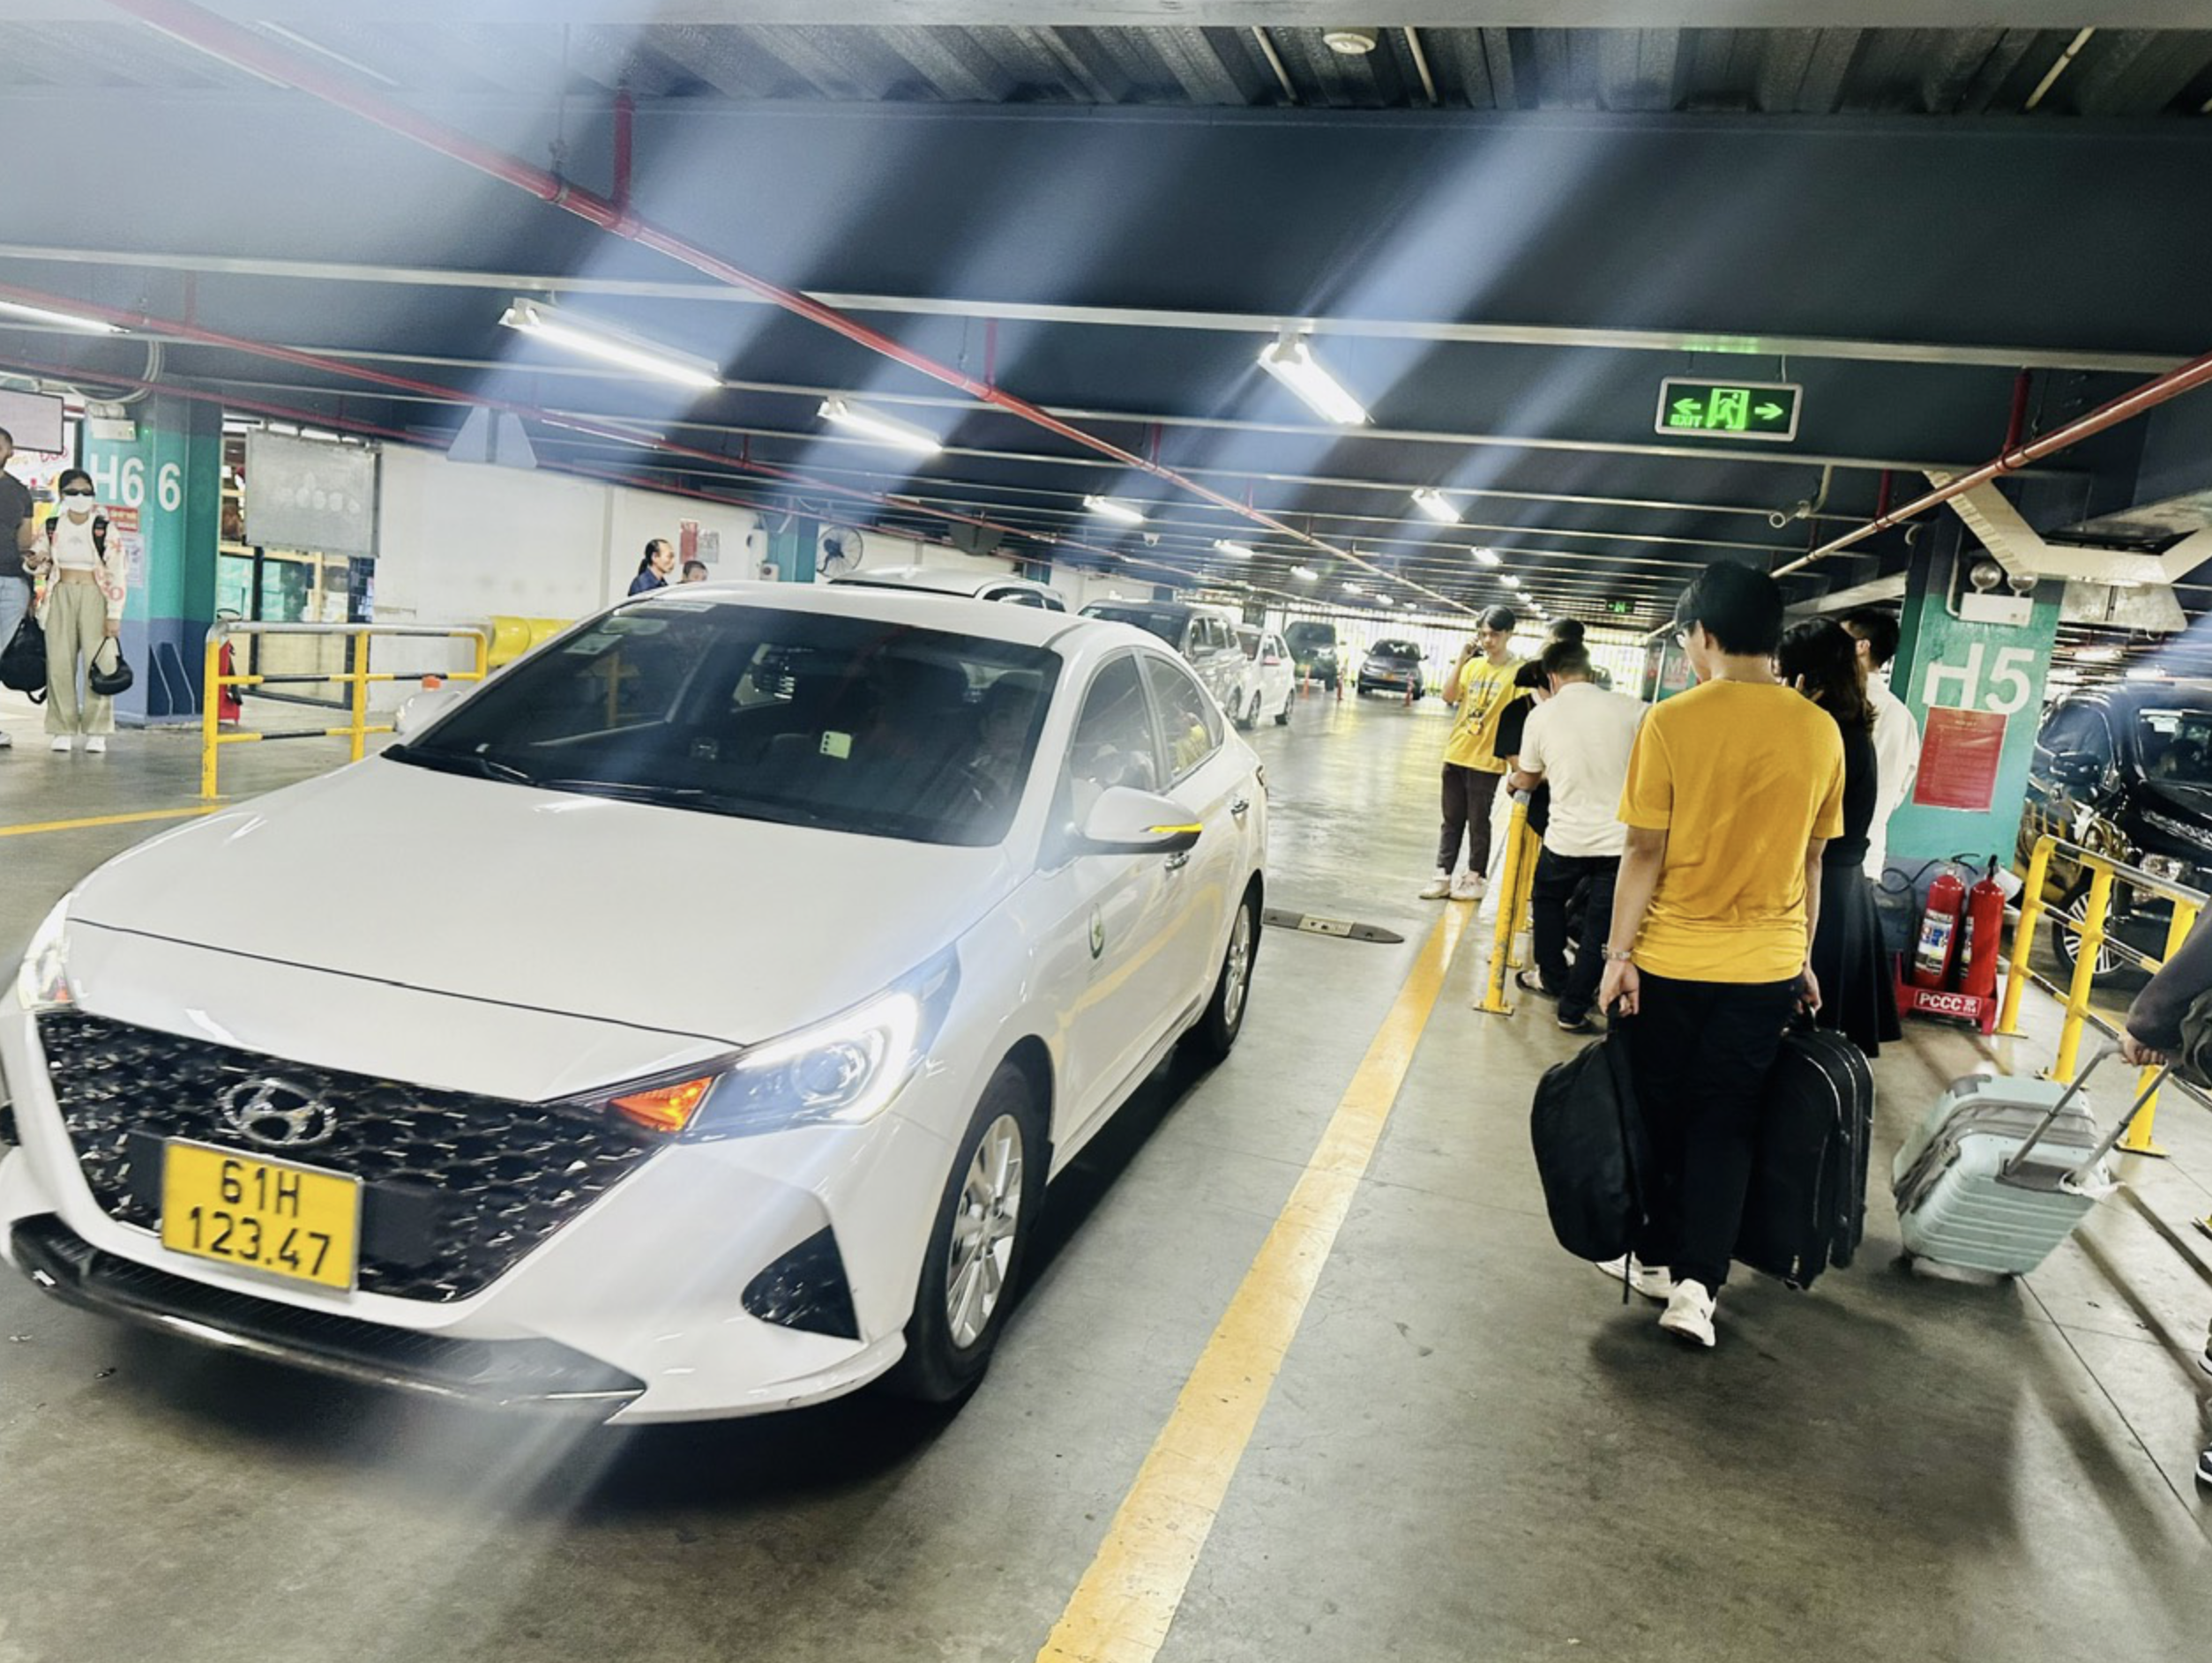 Taxi service providers and ride-hailing service operators are committed to supplying an adequate number of cabs to serve passengers at Tan Son Nhat International Airport after Tet. Photo: Cong Trung / Tuoi Tre